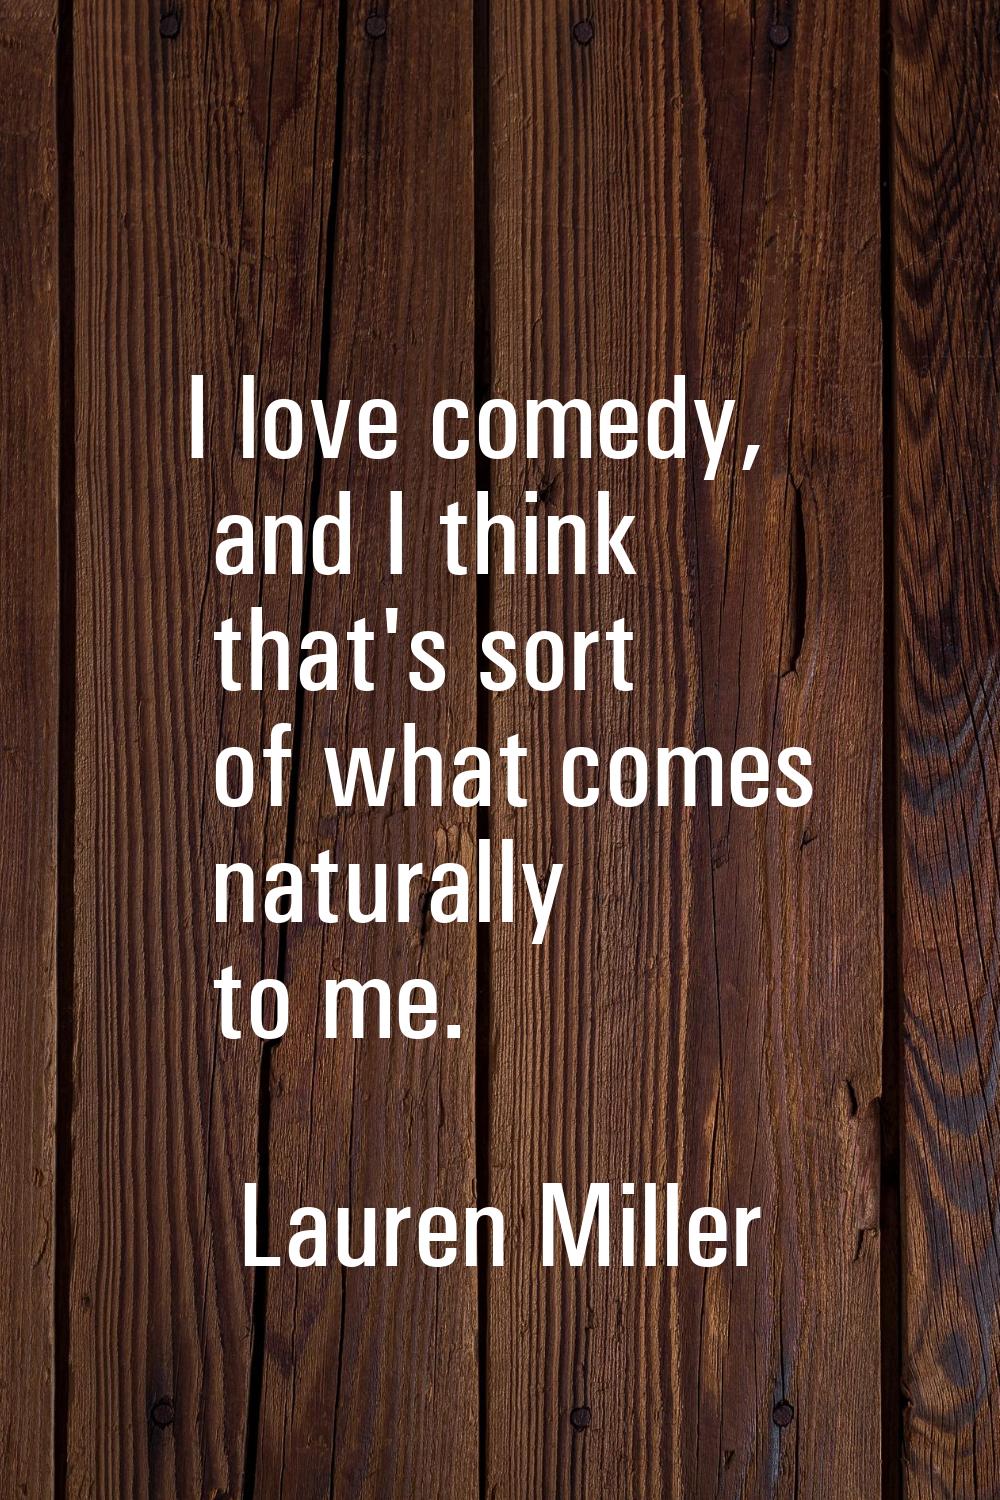 I love comedy, and I think that's sort of what comes naturally to me.